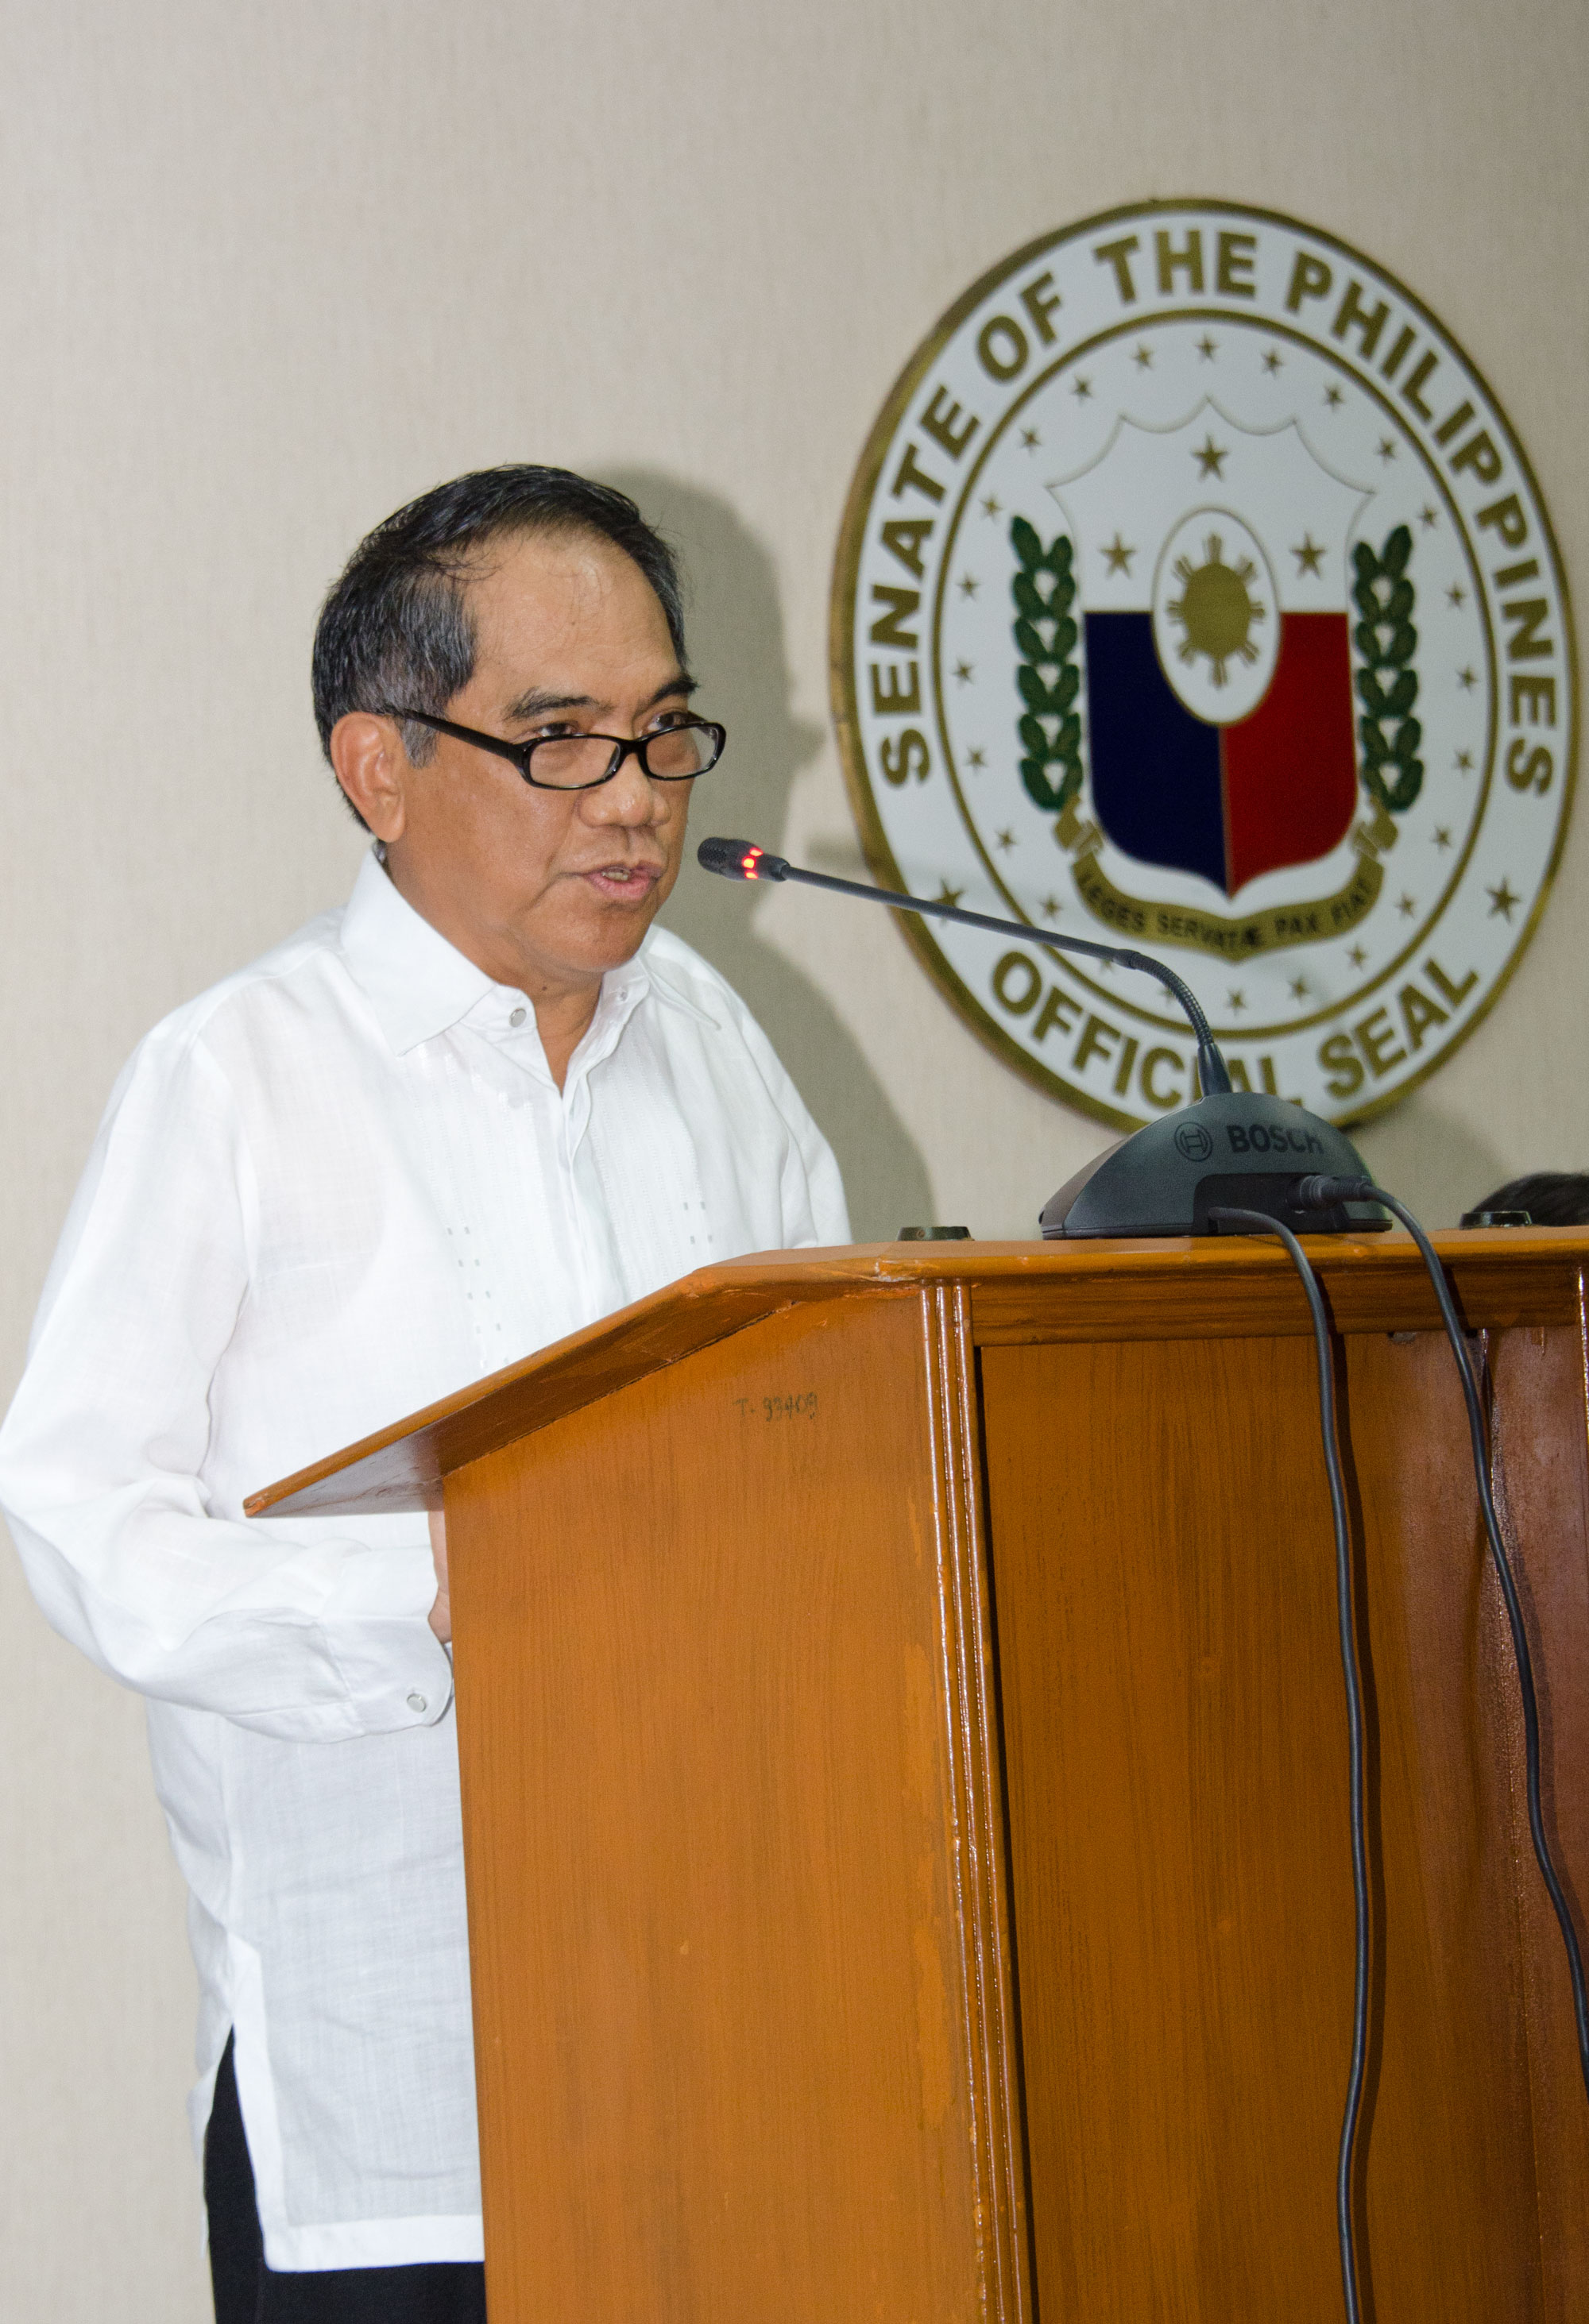 Senate Centennial Lecture Series “Assessment of the Bottom-up Budgeting Process for FY 2015-ggm_7862.jpg